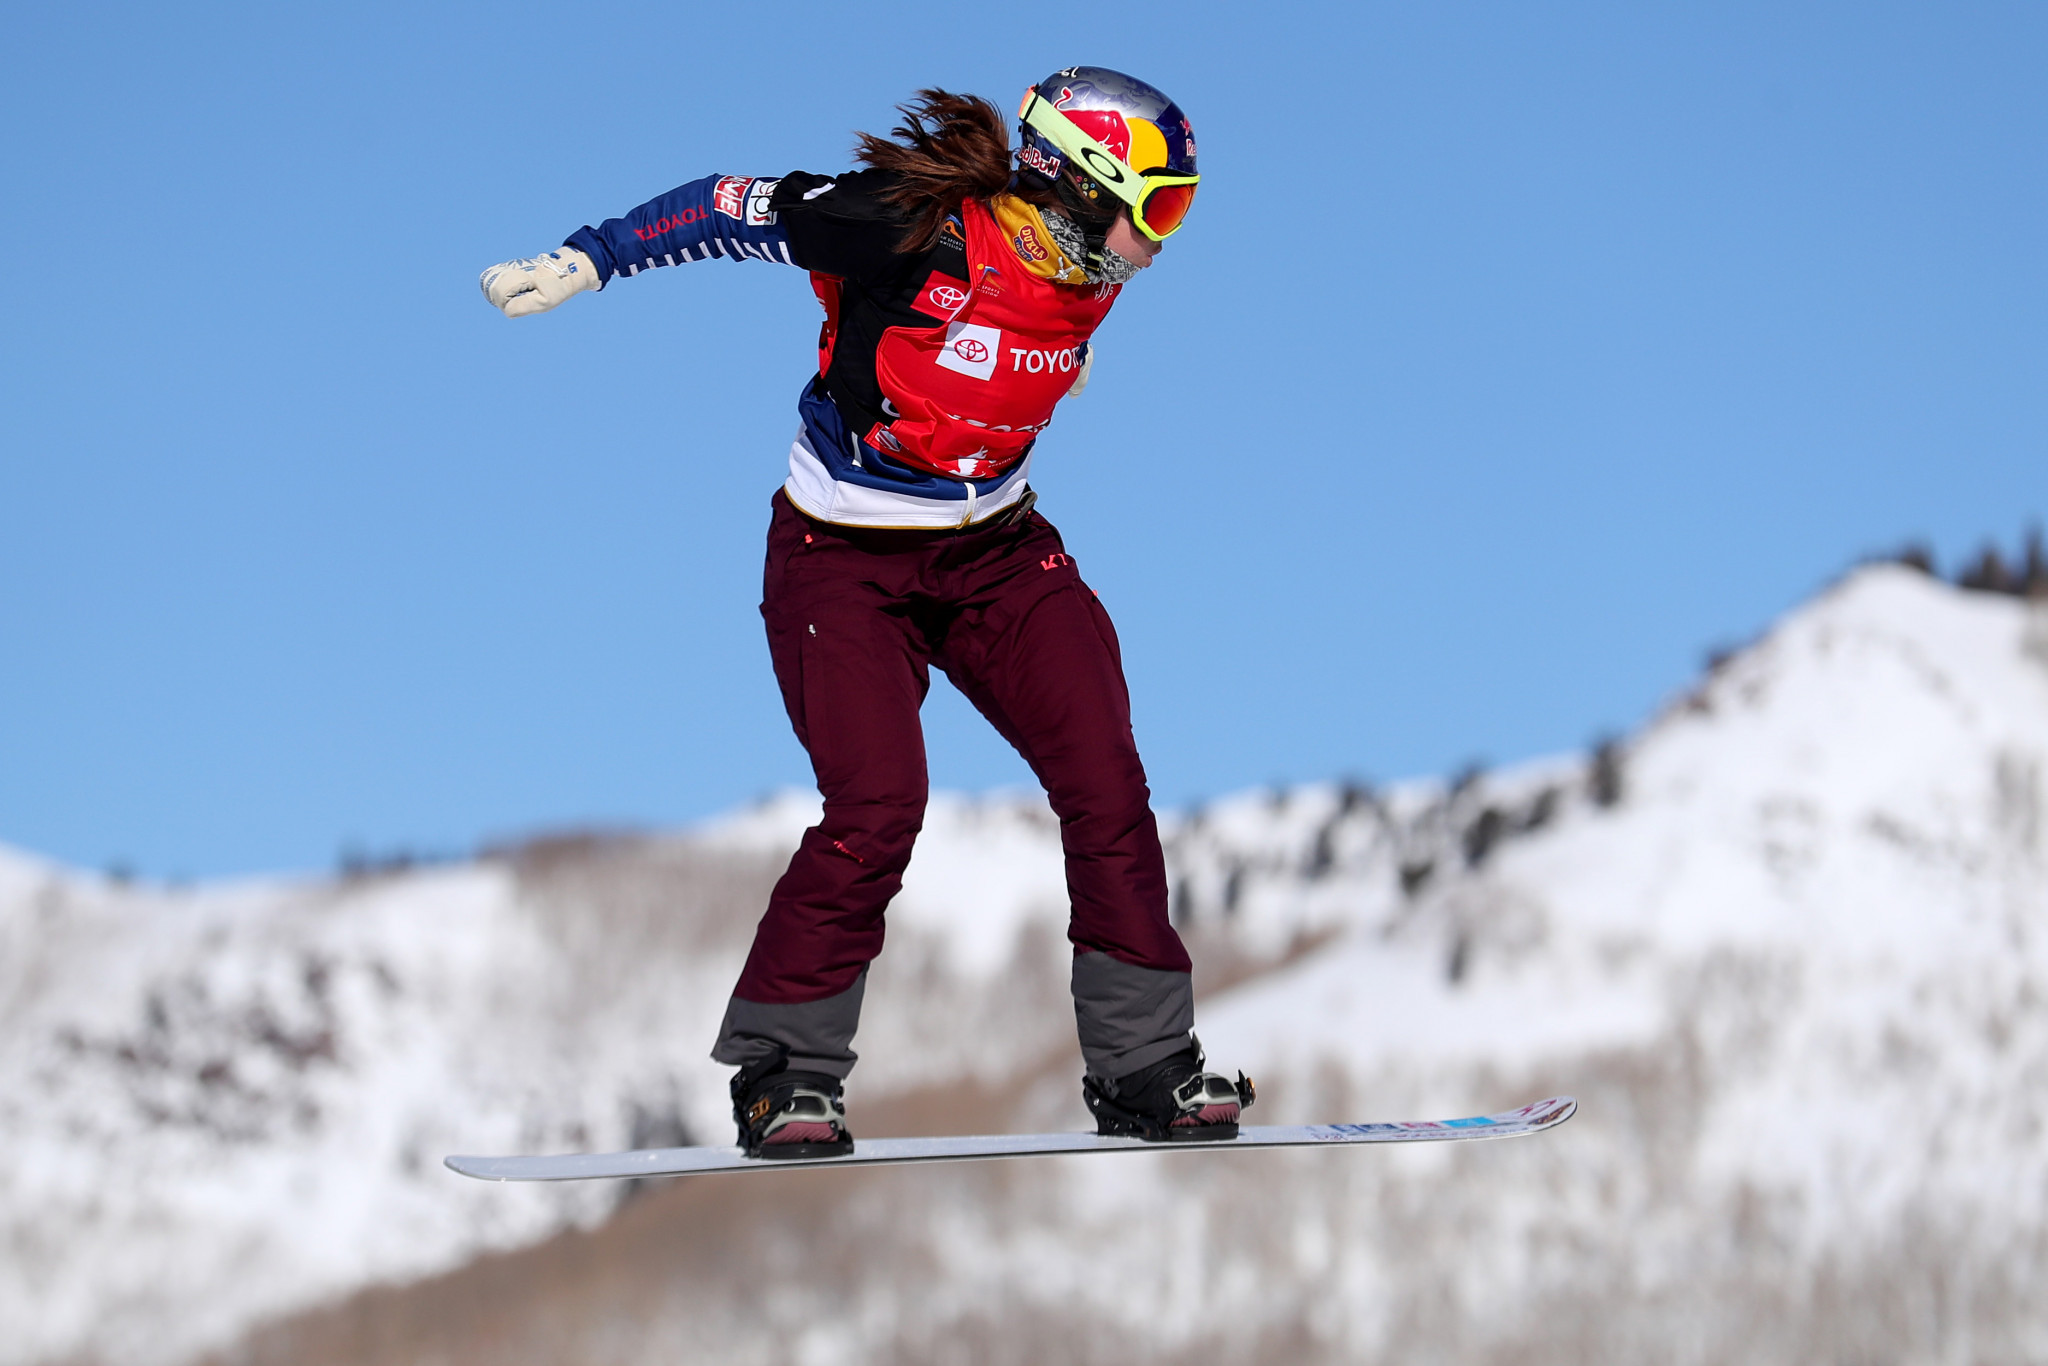 Samková and Dierdorff secure snowboard cross titles at FIS Freestyle Ski and Snowboard World Championships